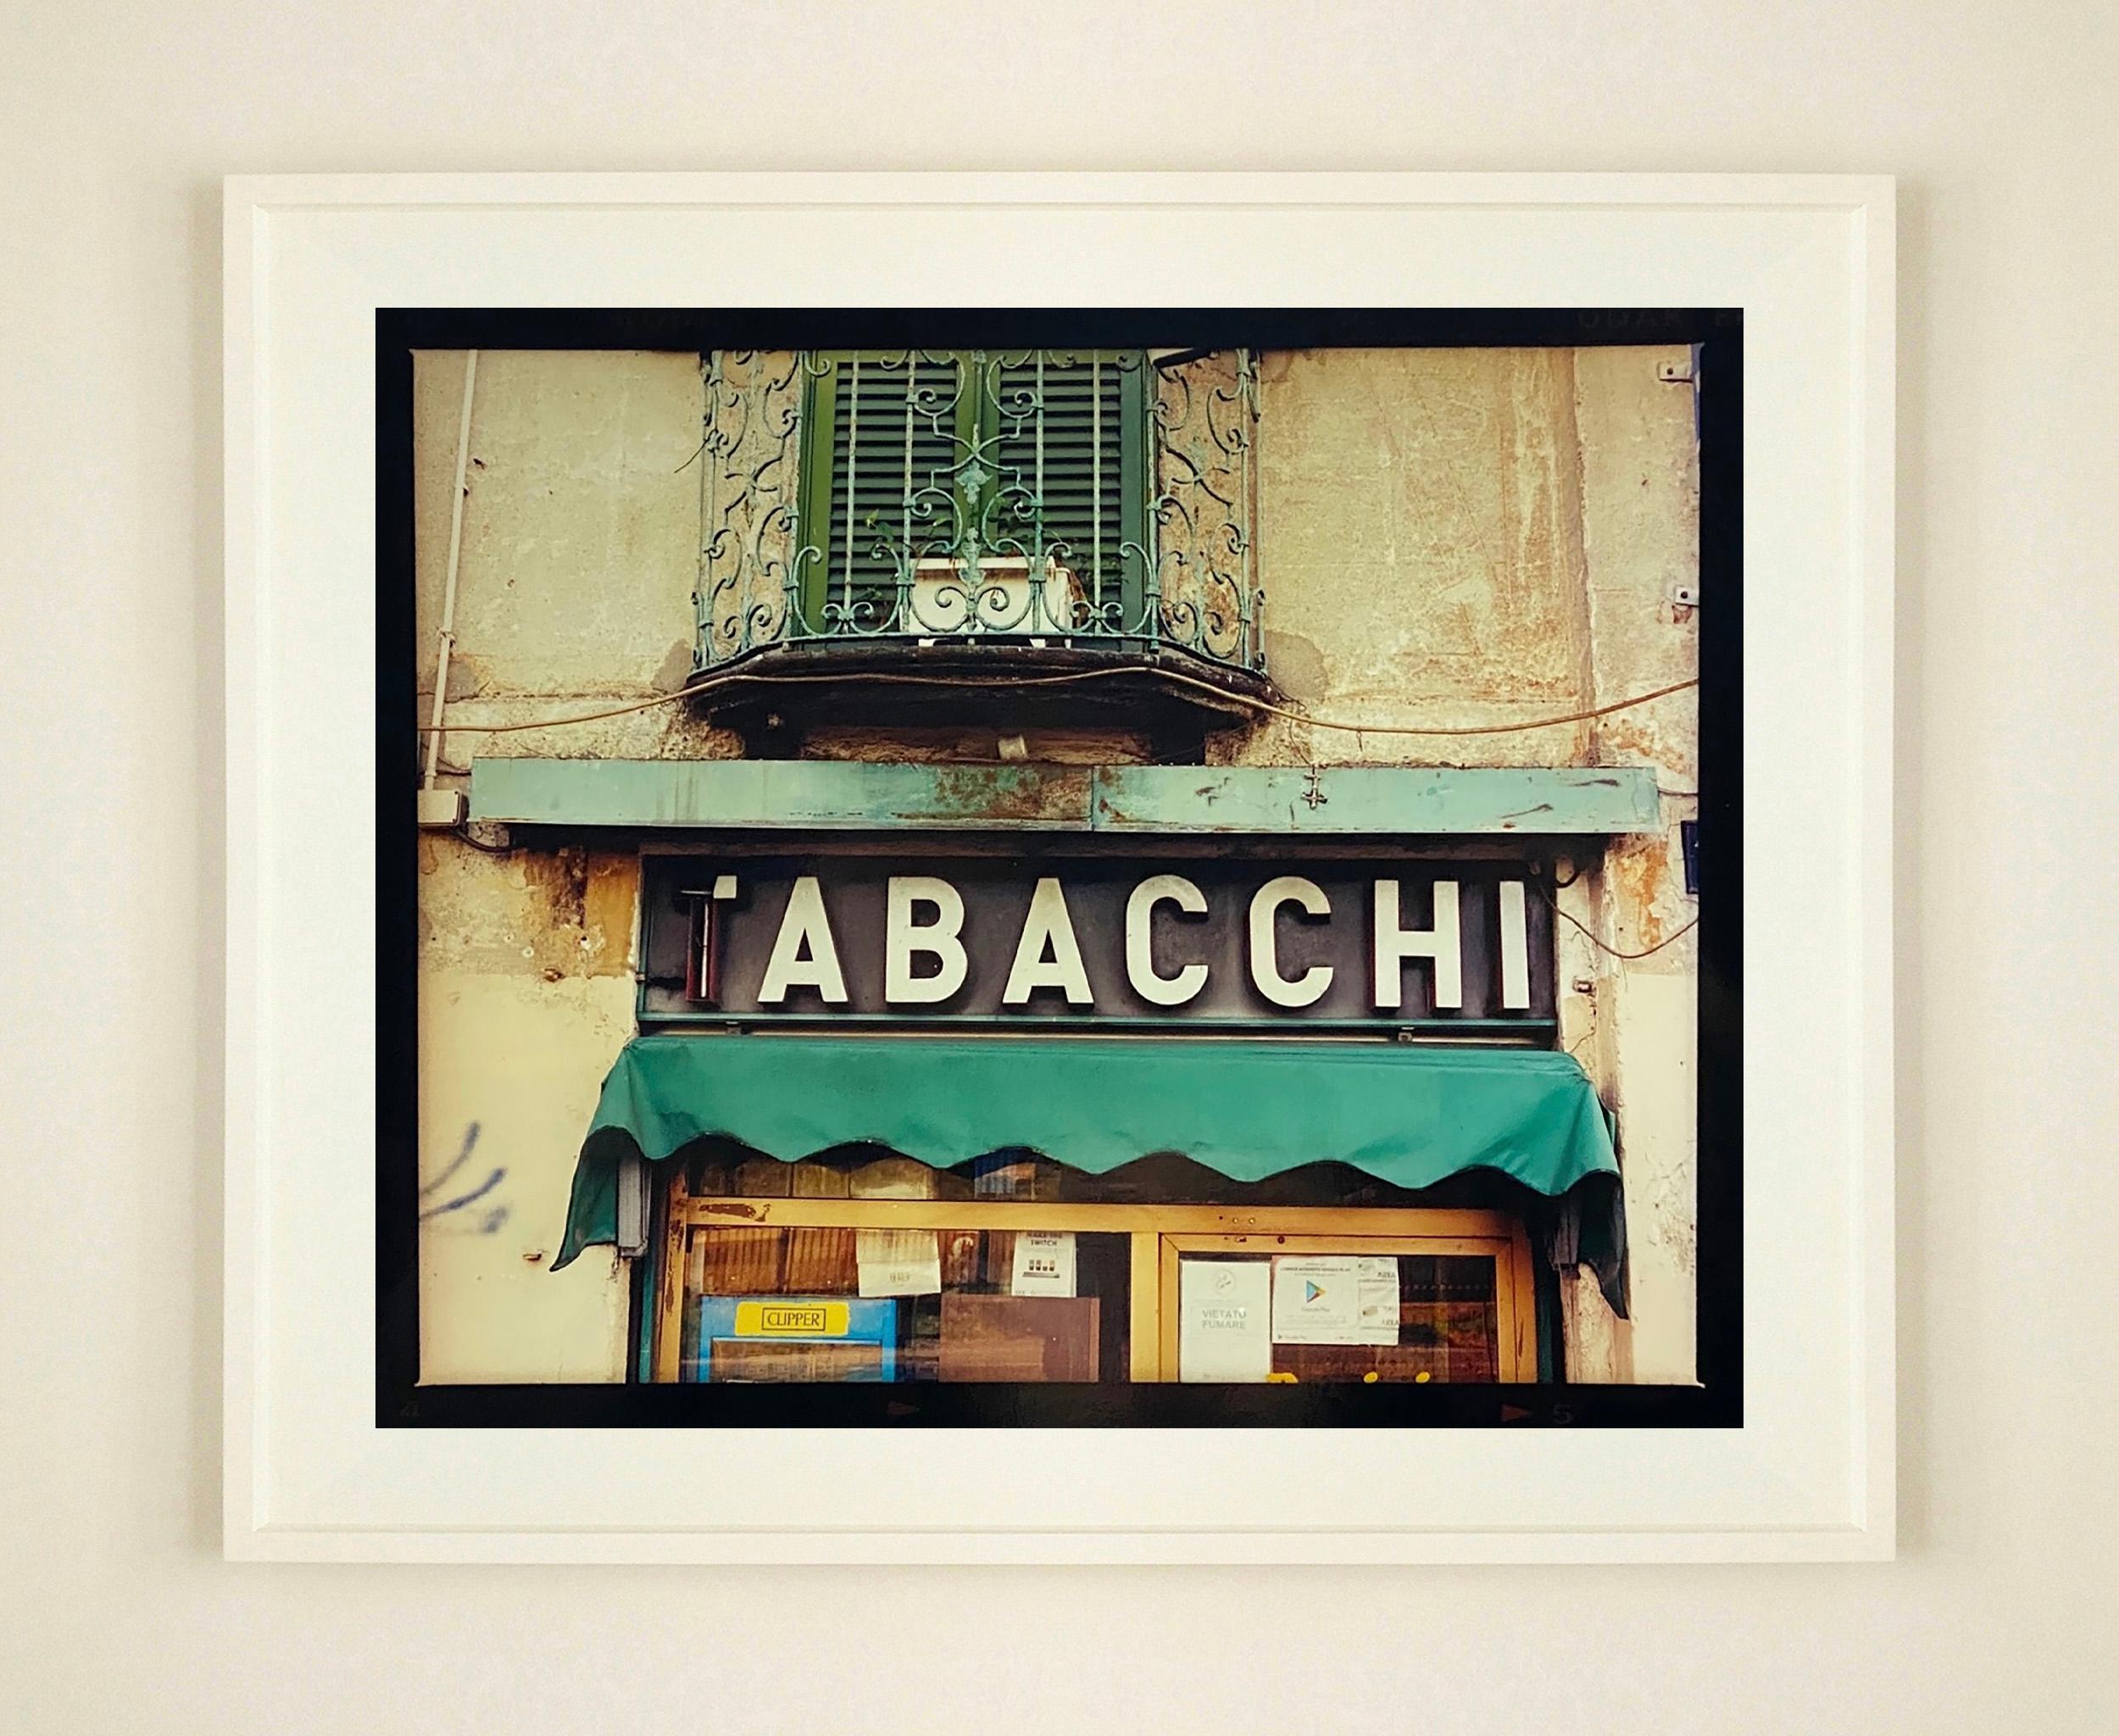 TABACCHI Sign, Milan - Contemporary Typography Sign Pop Art Color Photography - Black Print by Richard Heeps